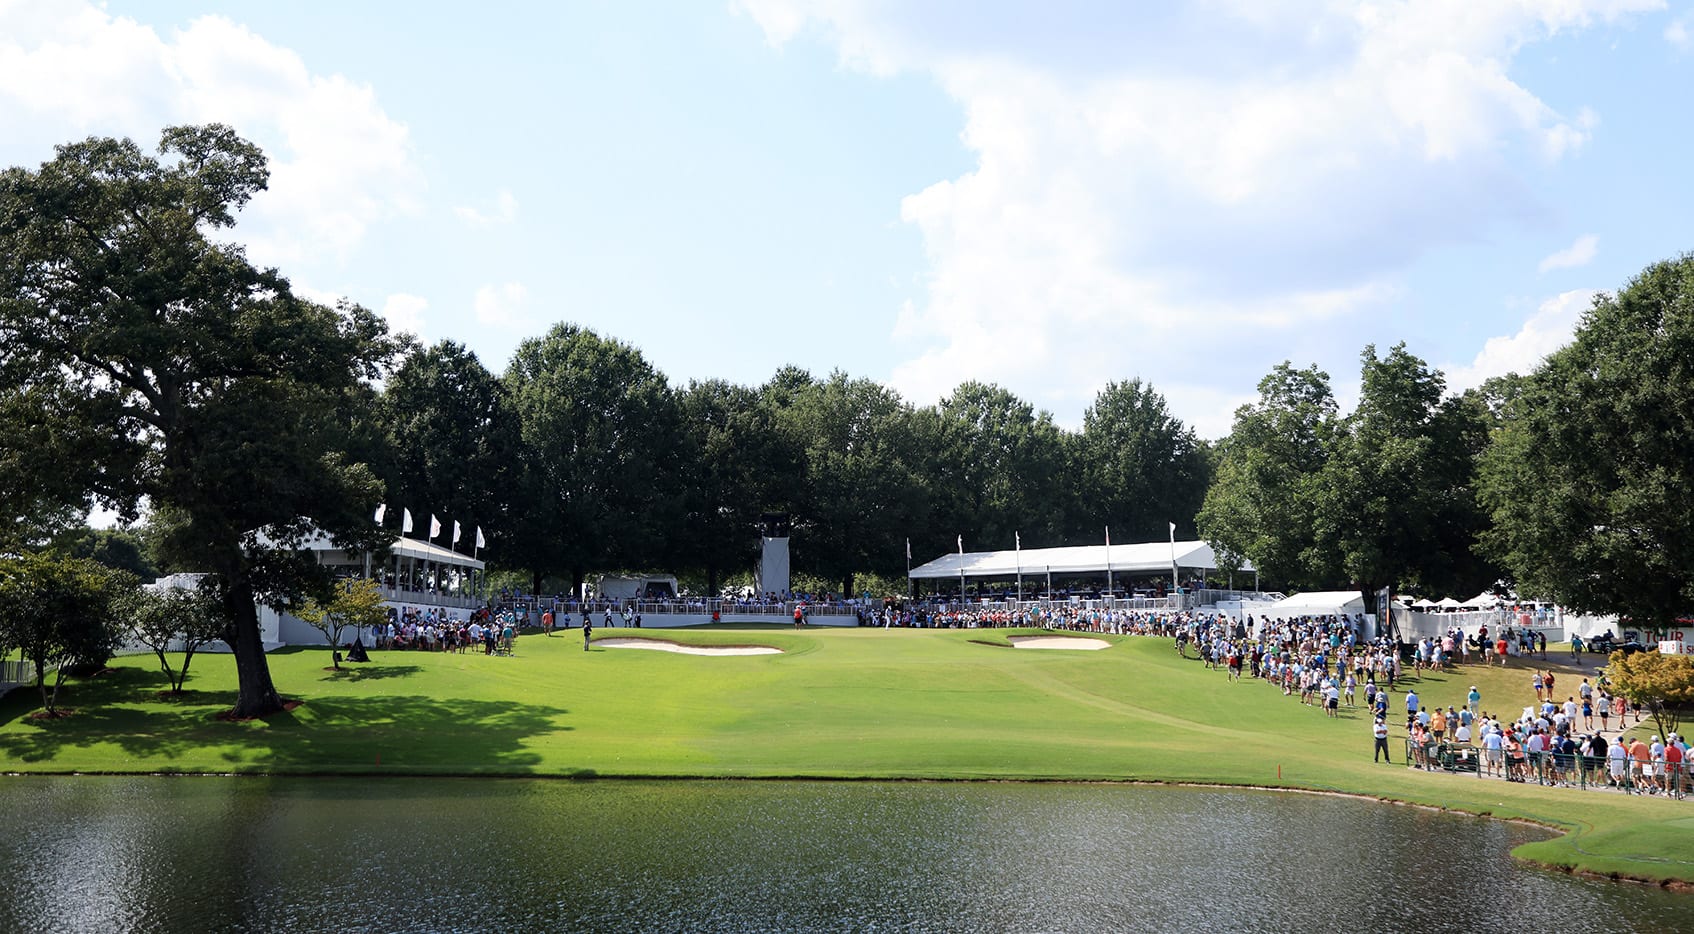 How to Watch the TOUR Championship, Round 2 Featured Groups, live